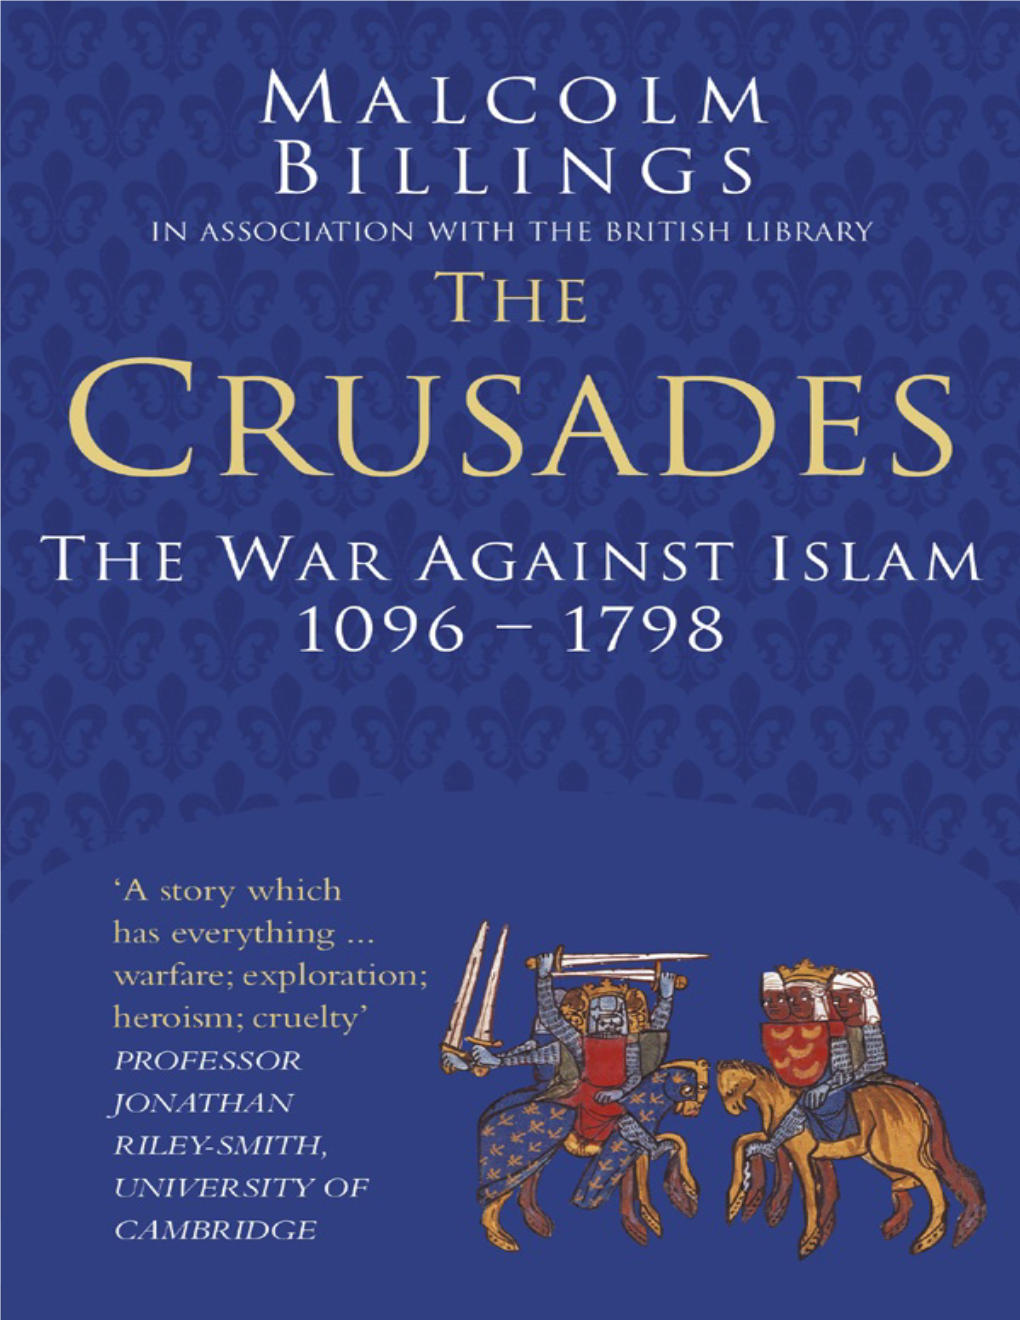 The Crusades of the Middle Ages and Their Interpretation Today by Extremist Muslims